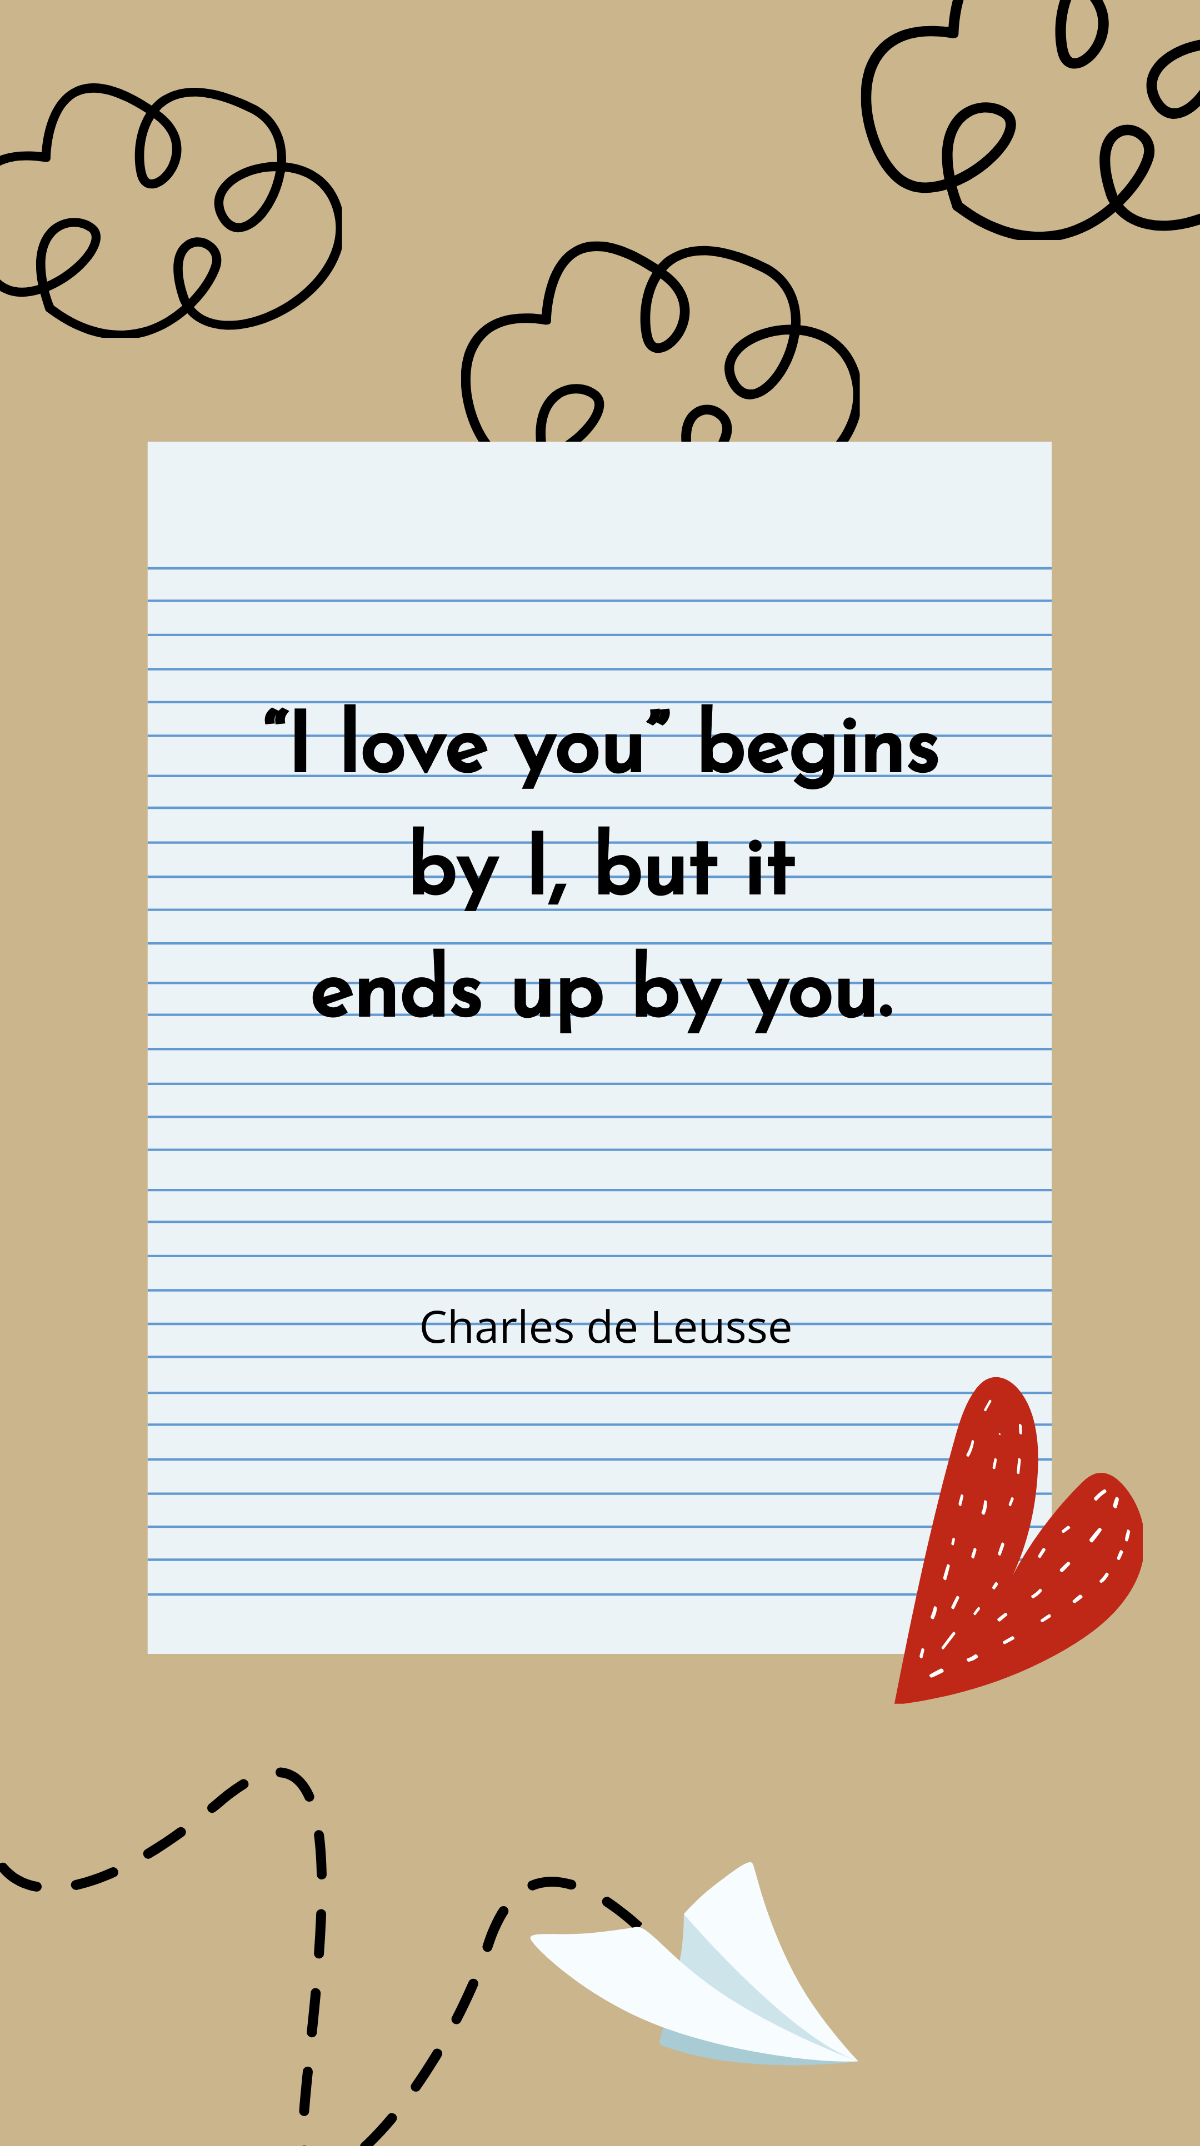 Charles de Leusse - “I love you” begins by I, but it ends up by you.